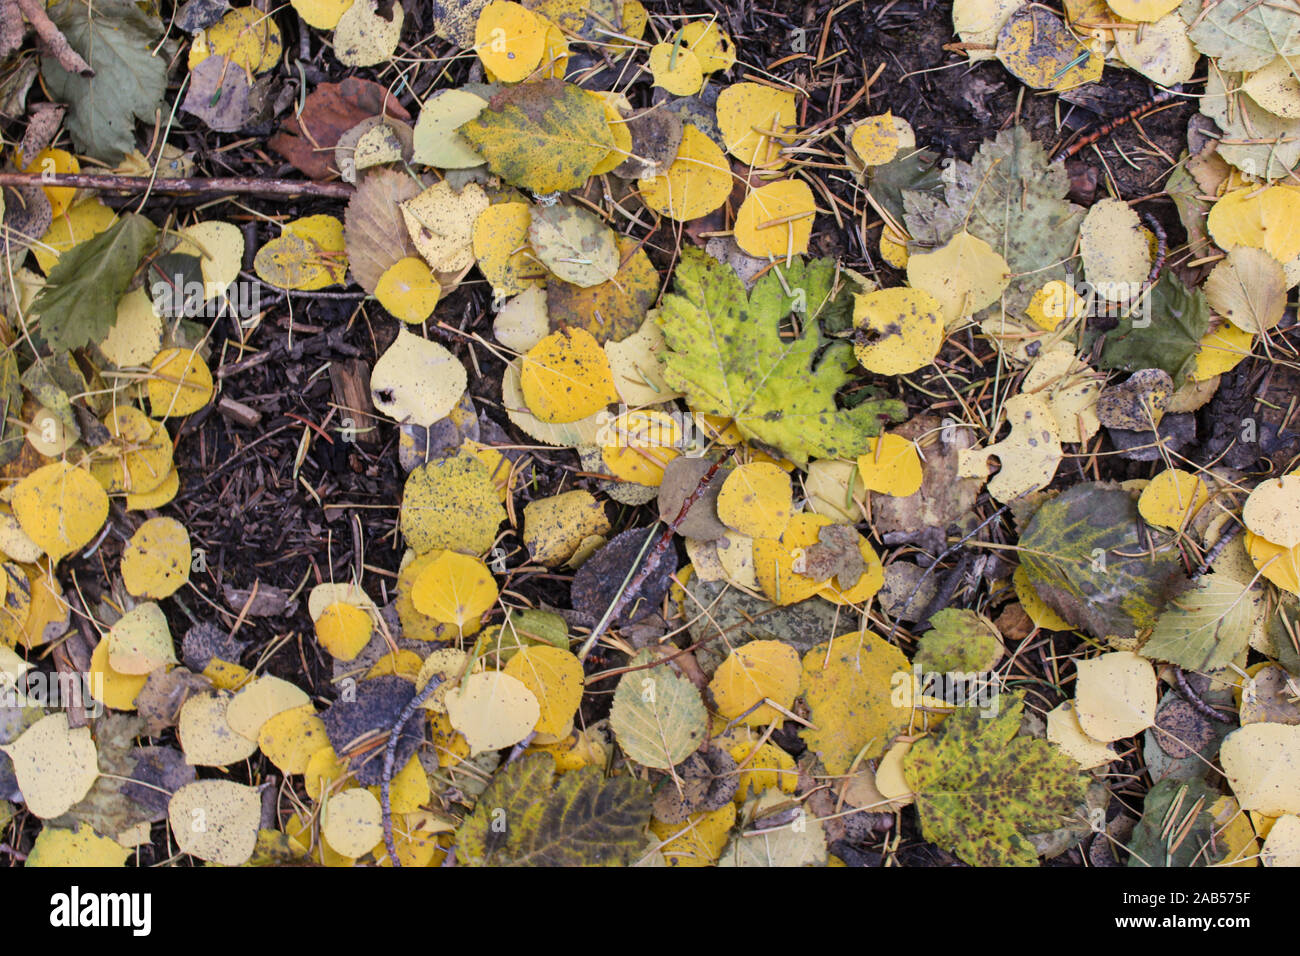 Colorful Fall Leaves and Pine Needles On Ground Background Stock Photo